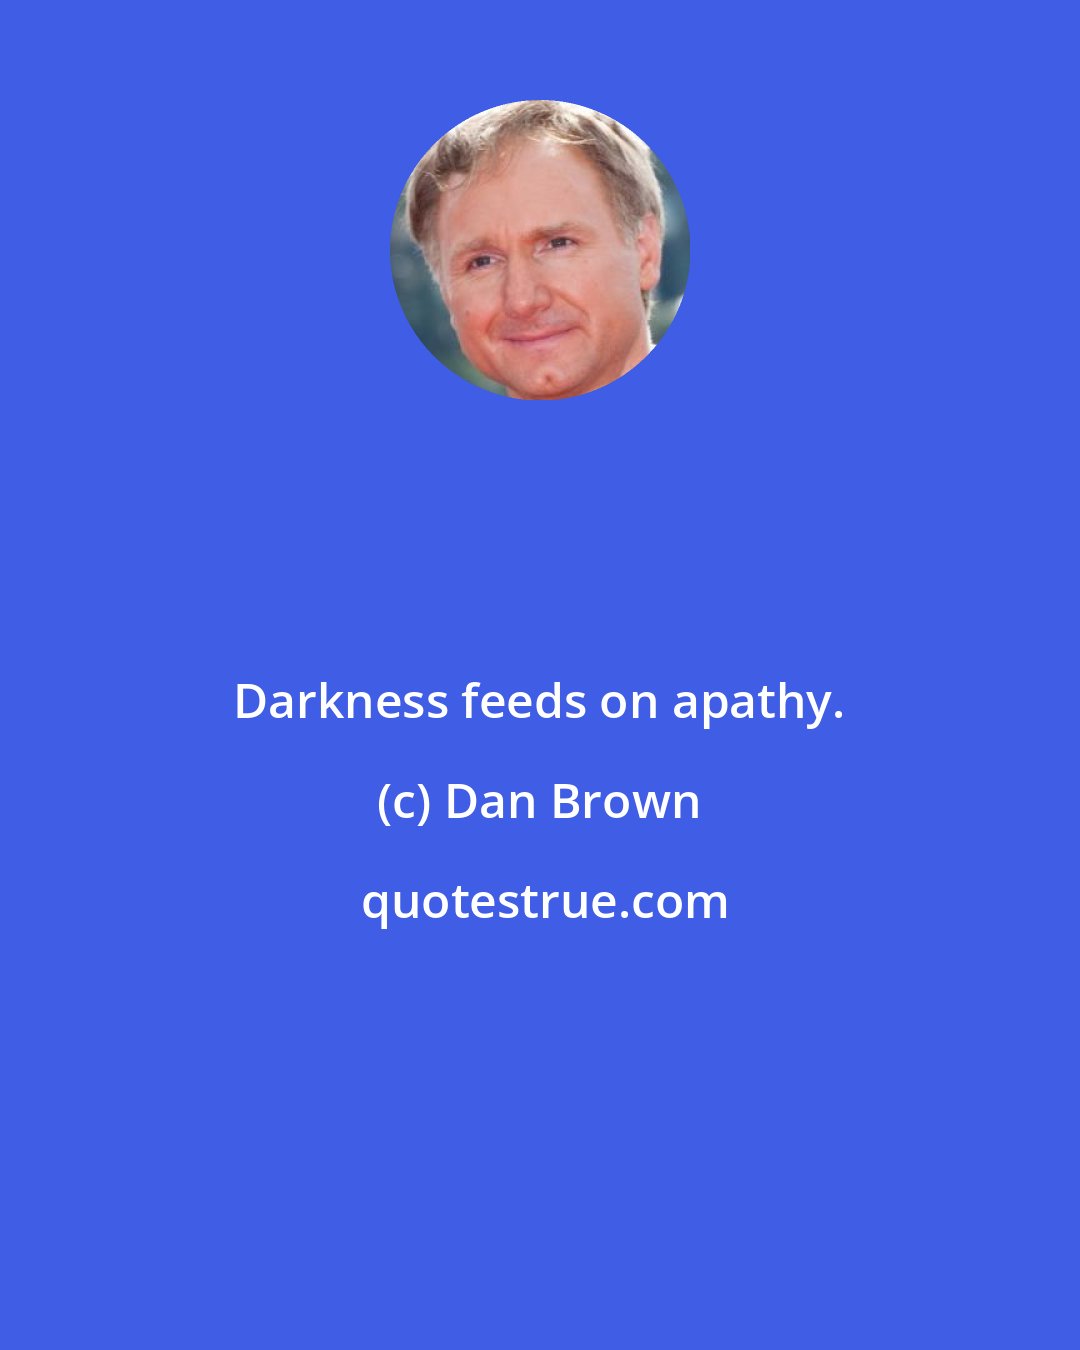 Dan Brown: Darkness feeds on apathy.